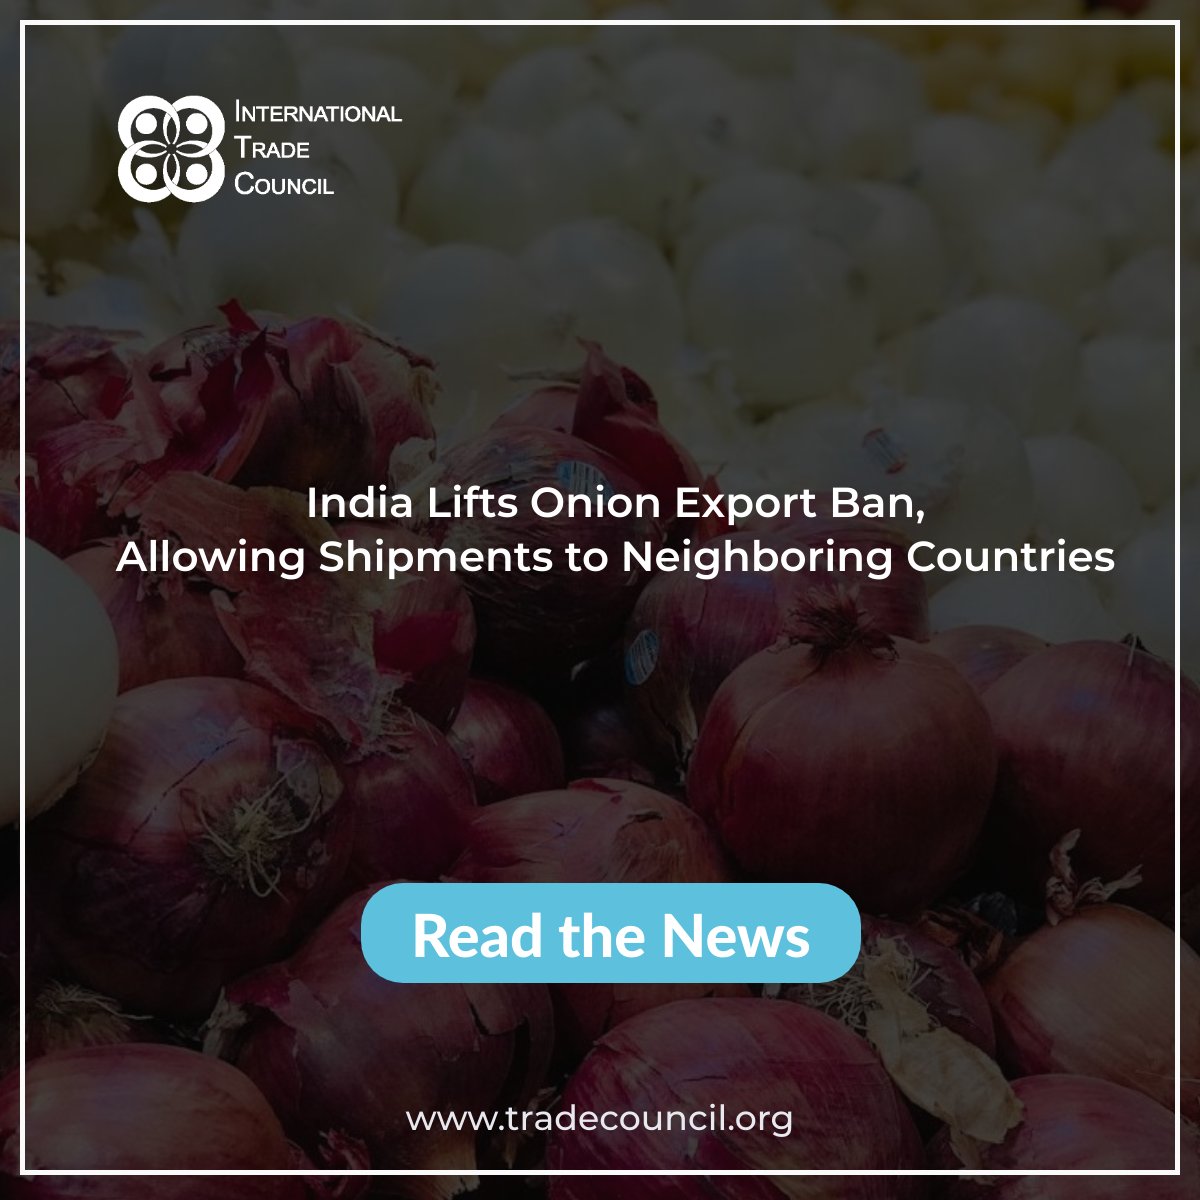 India Lifts Onion Export Ban, Allowing Shipments to Neighboring Countries
Read The News: tradecouncil.org/india-lifts-on…
#ITCNewsUpdates #BreakingNews #OnionExports #TradePolicy #IndianEconomy #RegionalTrade #InternationalTradeCouncil